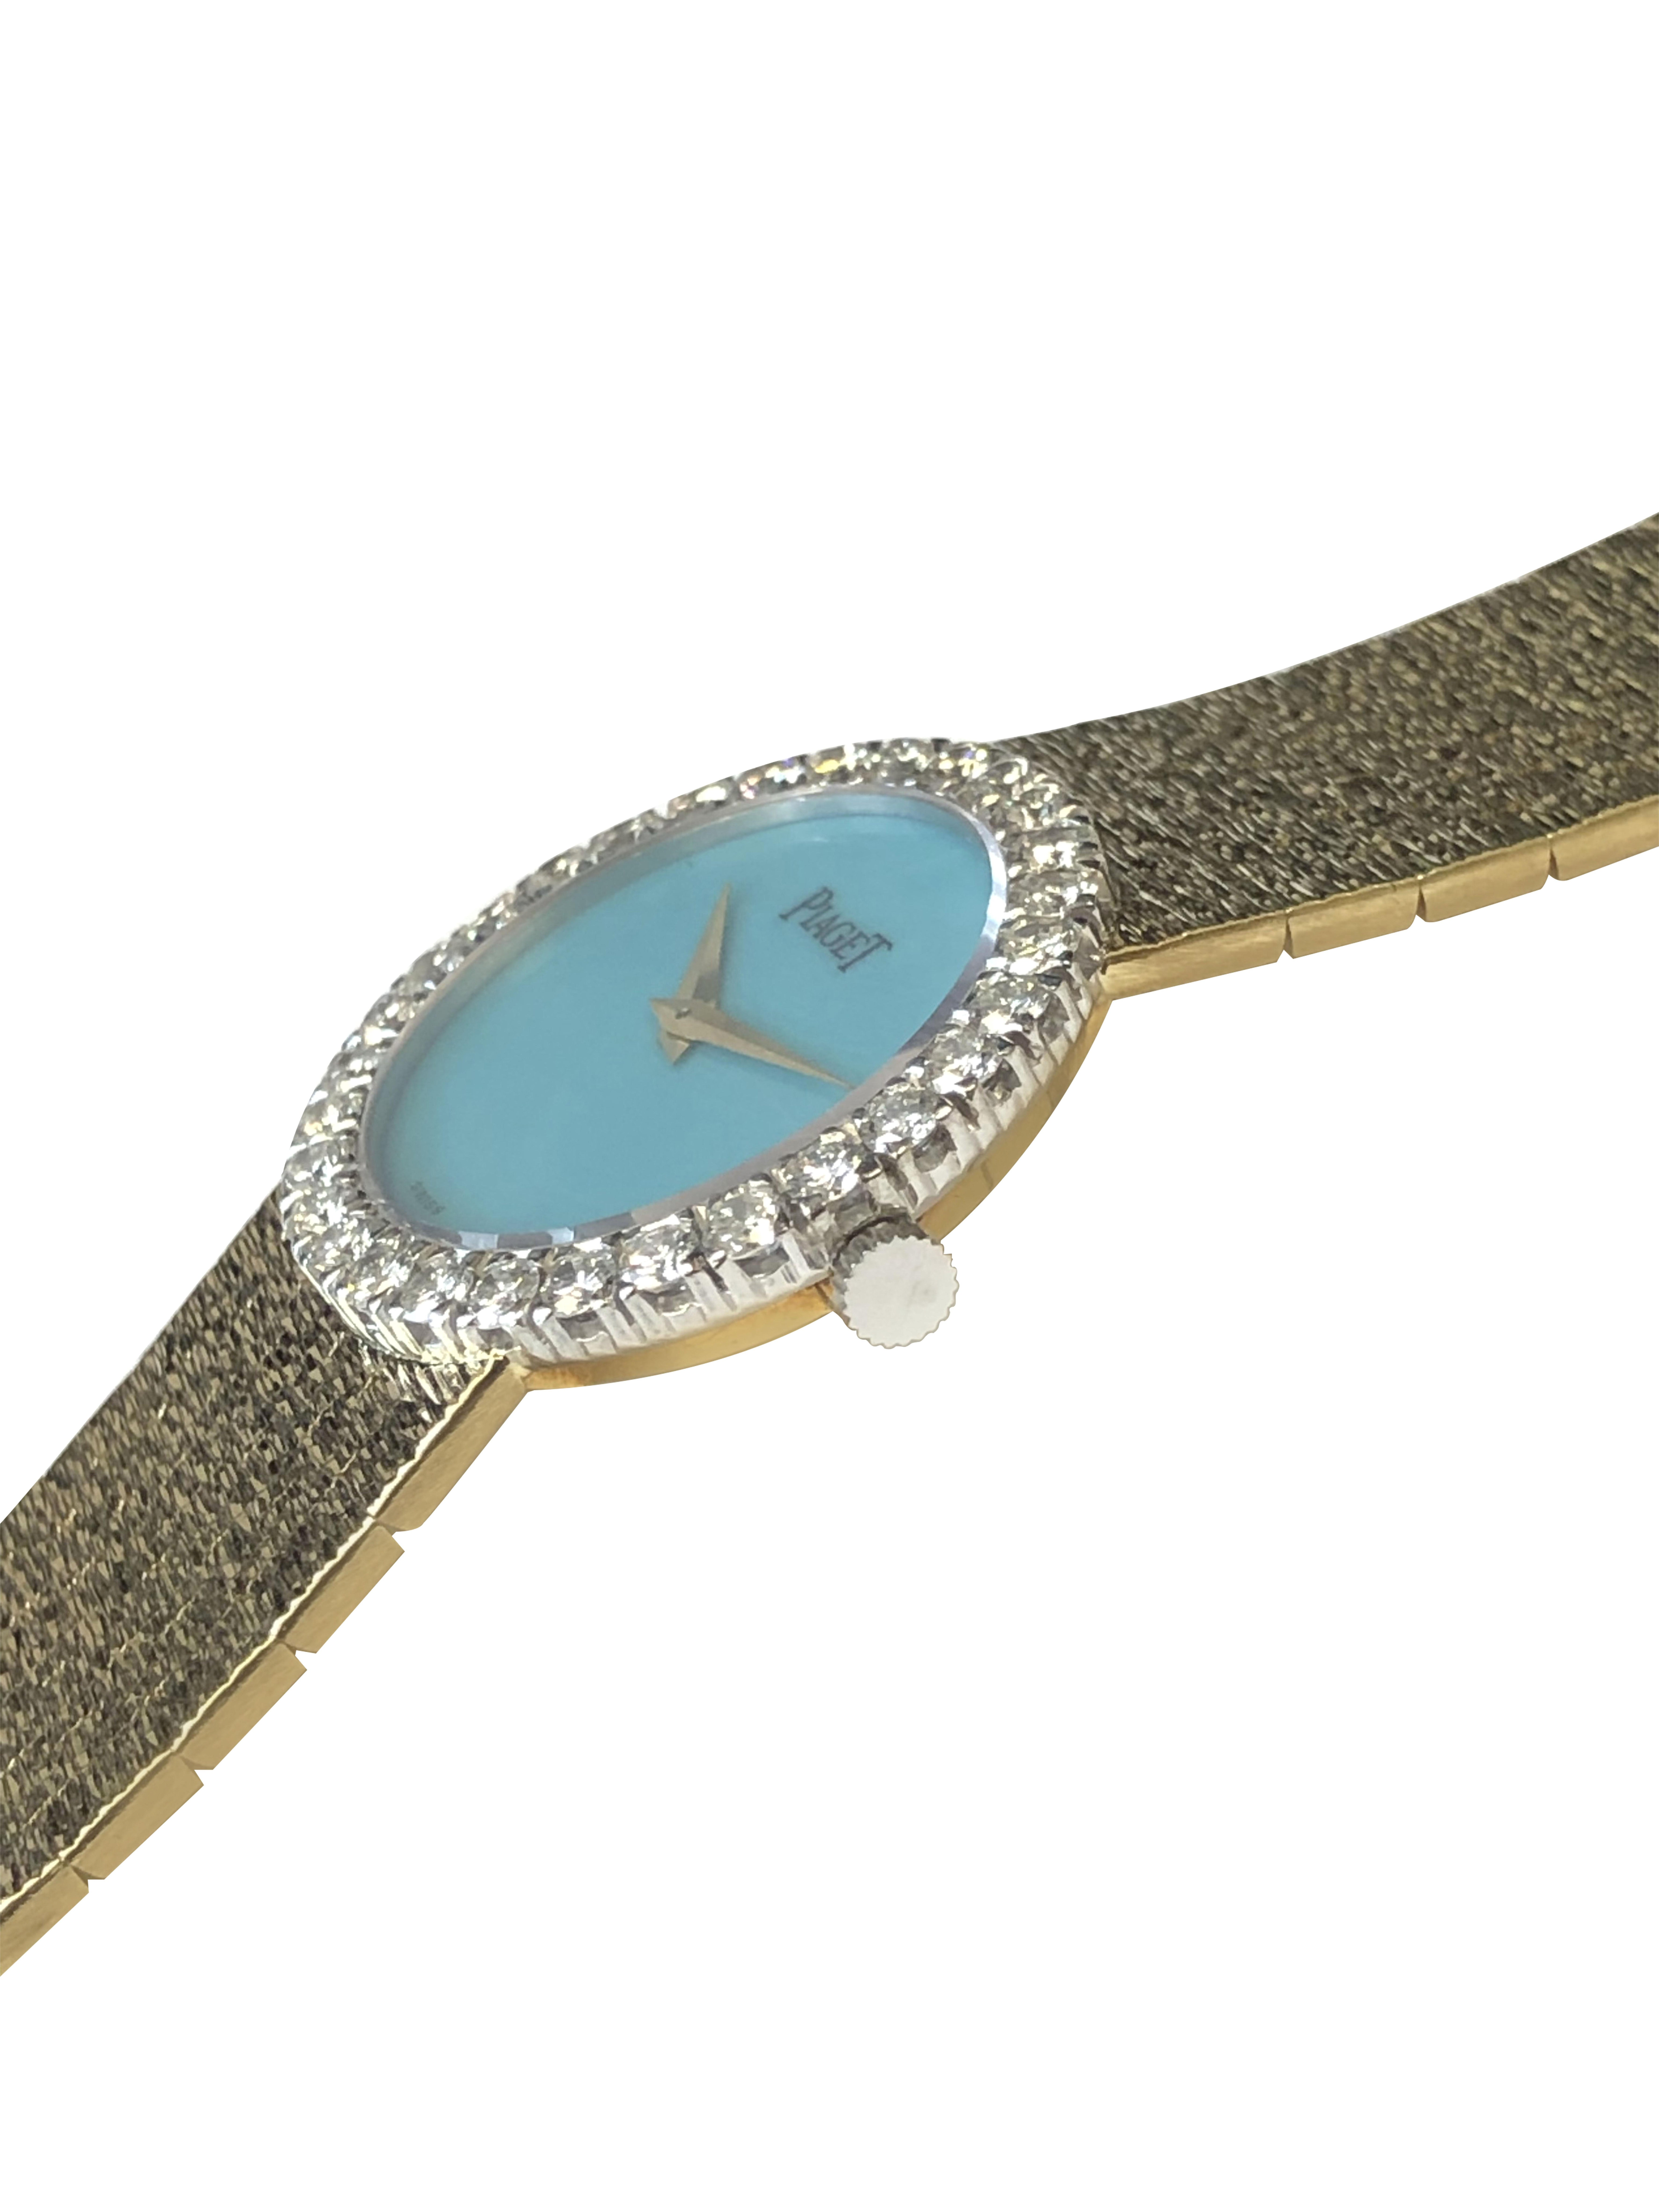 Circa 1980 Piaget Ladies Wrist Watch, 26 M.M. 2 Piece 18K Yellow Gold case, White Gold Bezel set with Fine Round Brilliant cut Diamonds totaling approximately 2 Carats. 17 Jewel Mechanical, Manual Wind Movement. Turquoise Dial and Gold Hands. 5/8